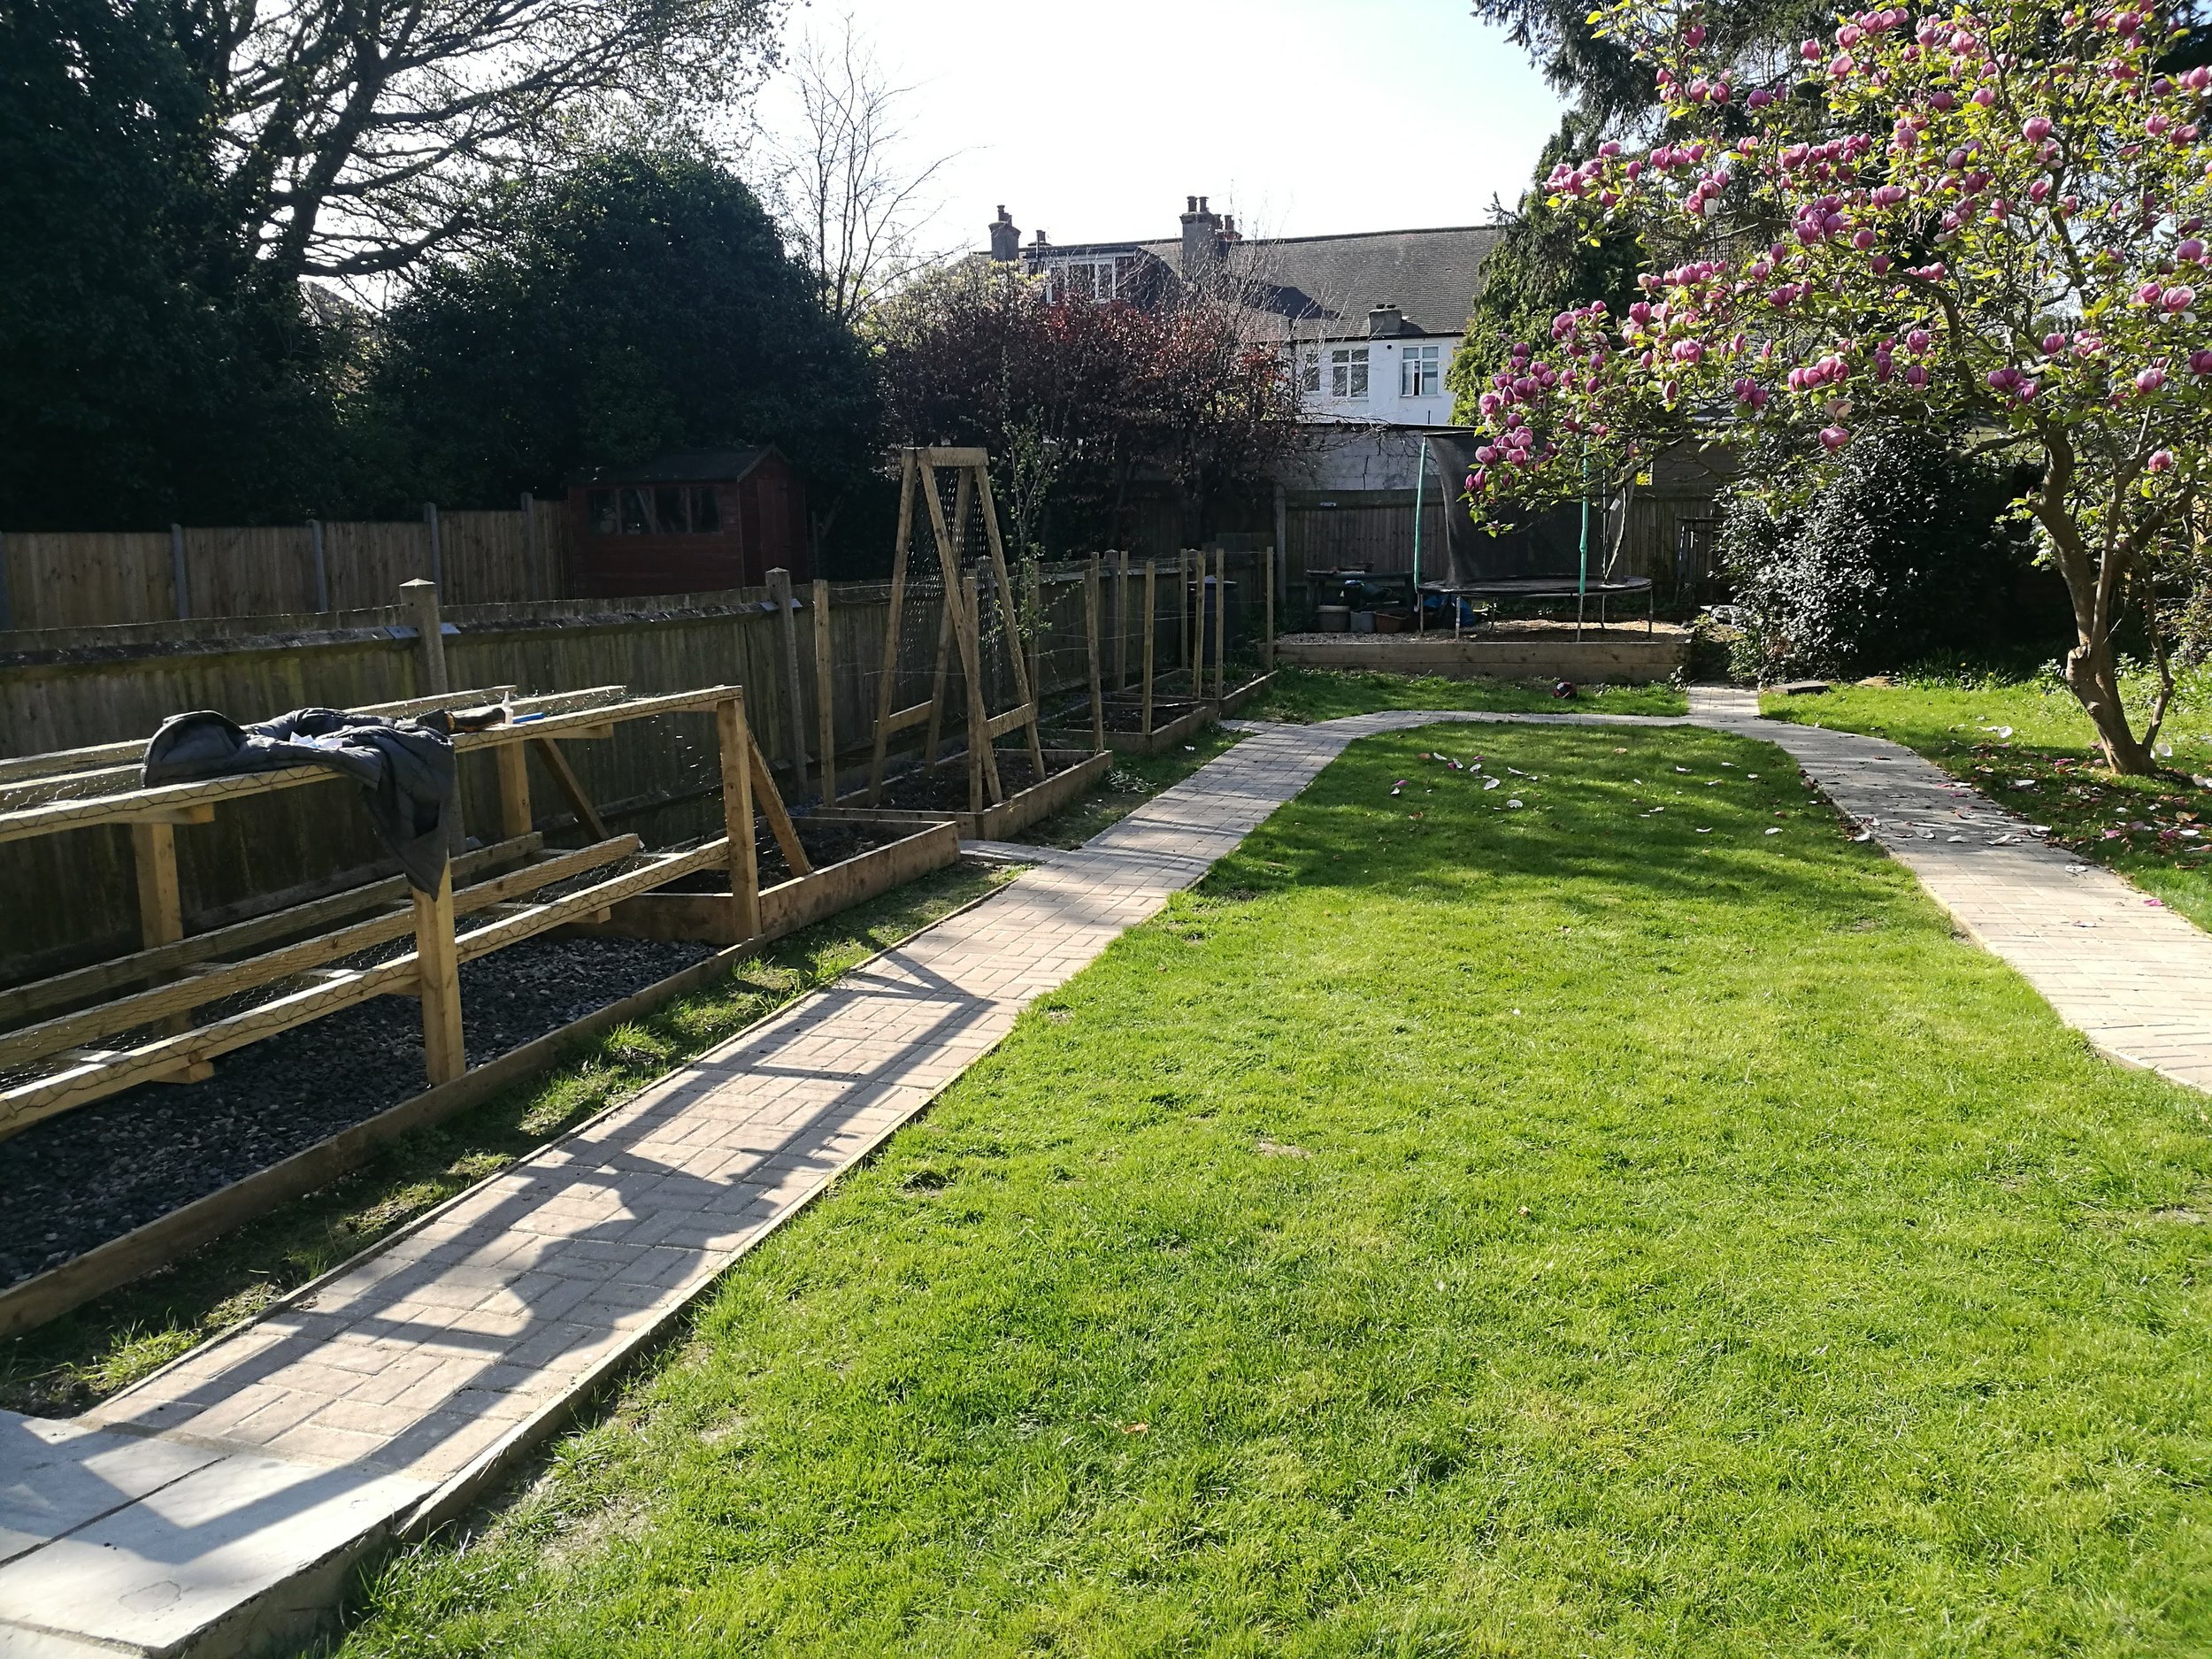 N E Gardencare Landscaping and Gardening in South East London Club Card 3.jpg